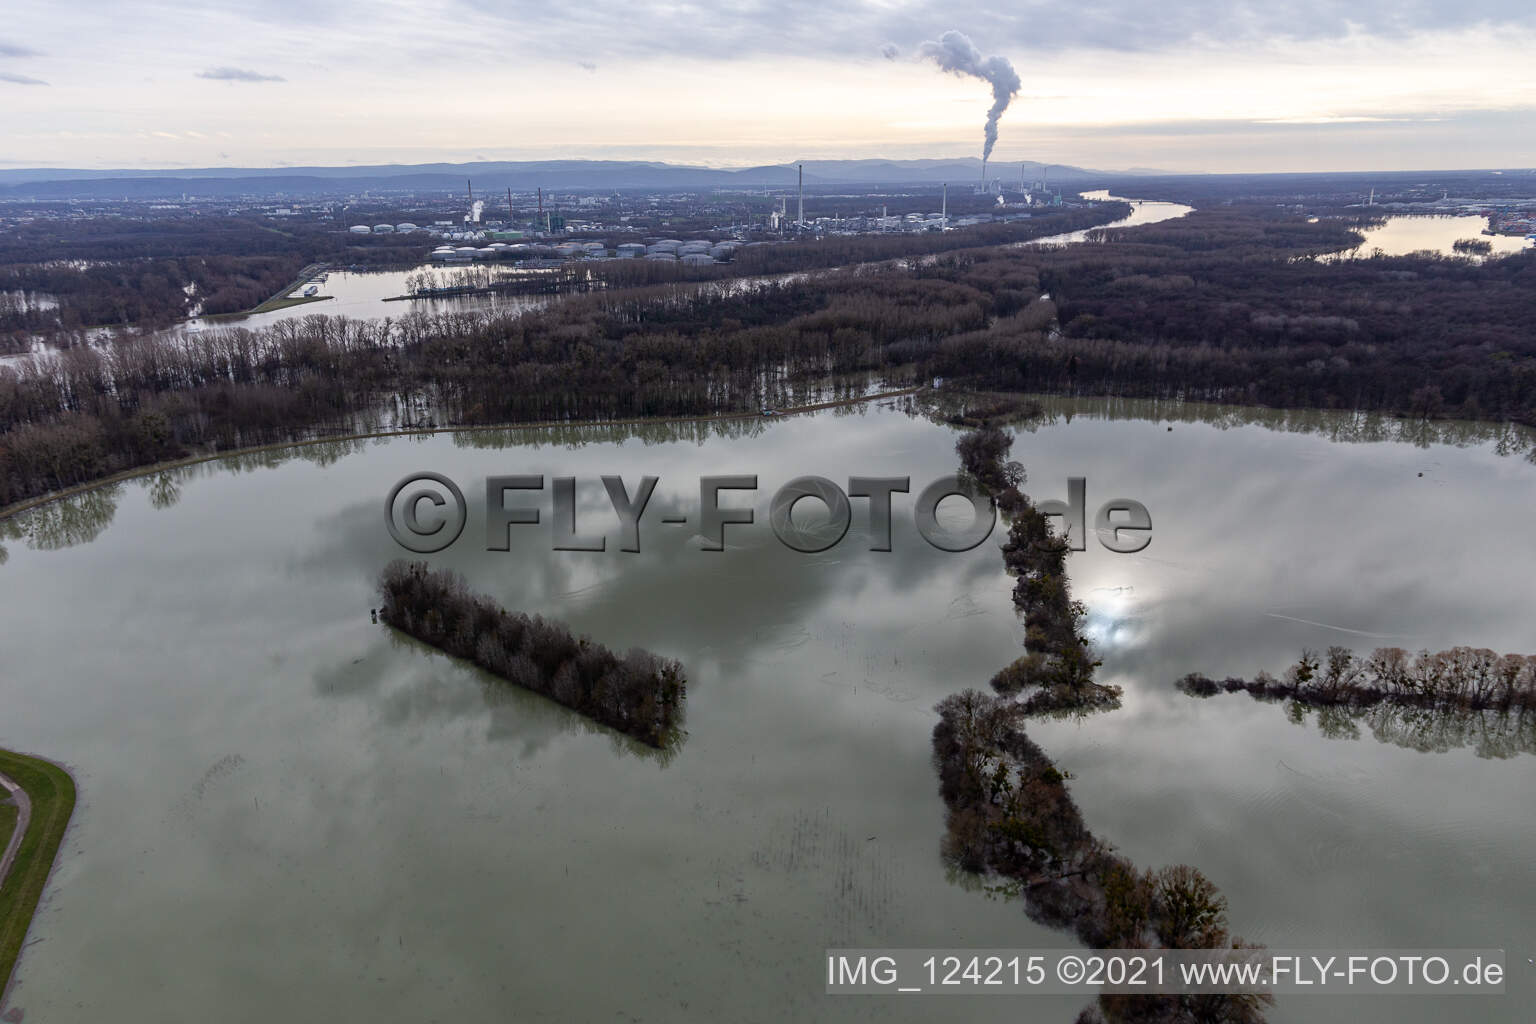 Aerial photograpy of Riparian areas and flooded flood meadows of Polder Neupotz due to a river bed leading to flood levels of the Rhine river in Neupotz in the state Rhineland-Palatinate, Germany